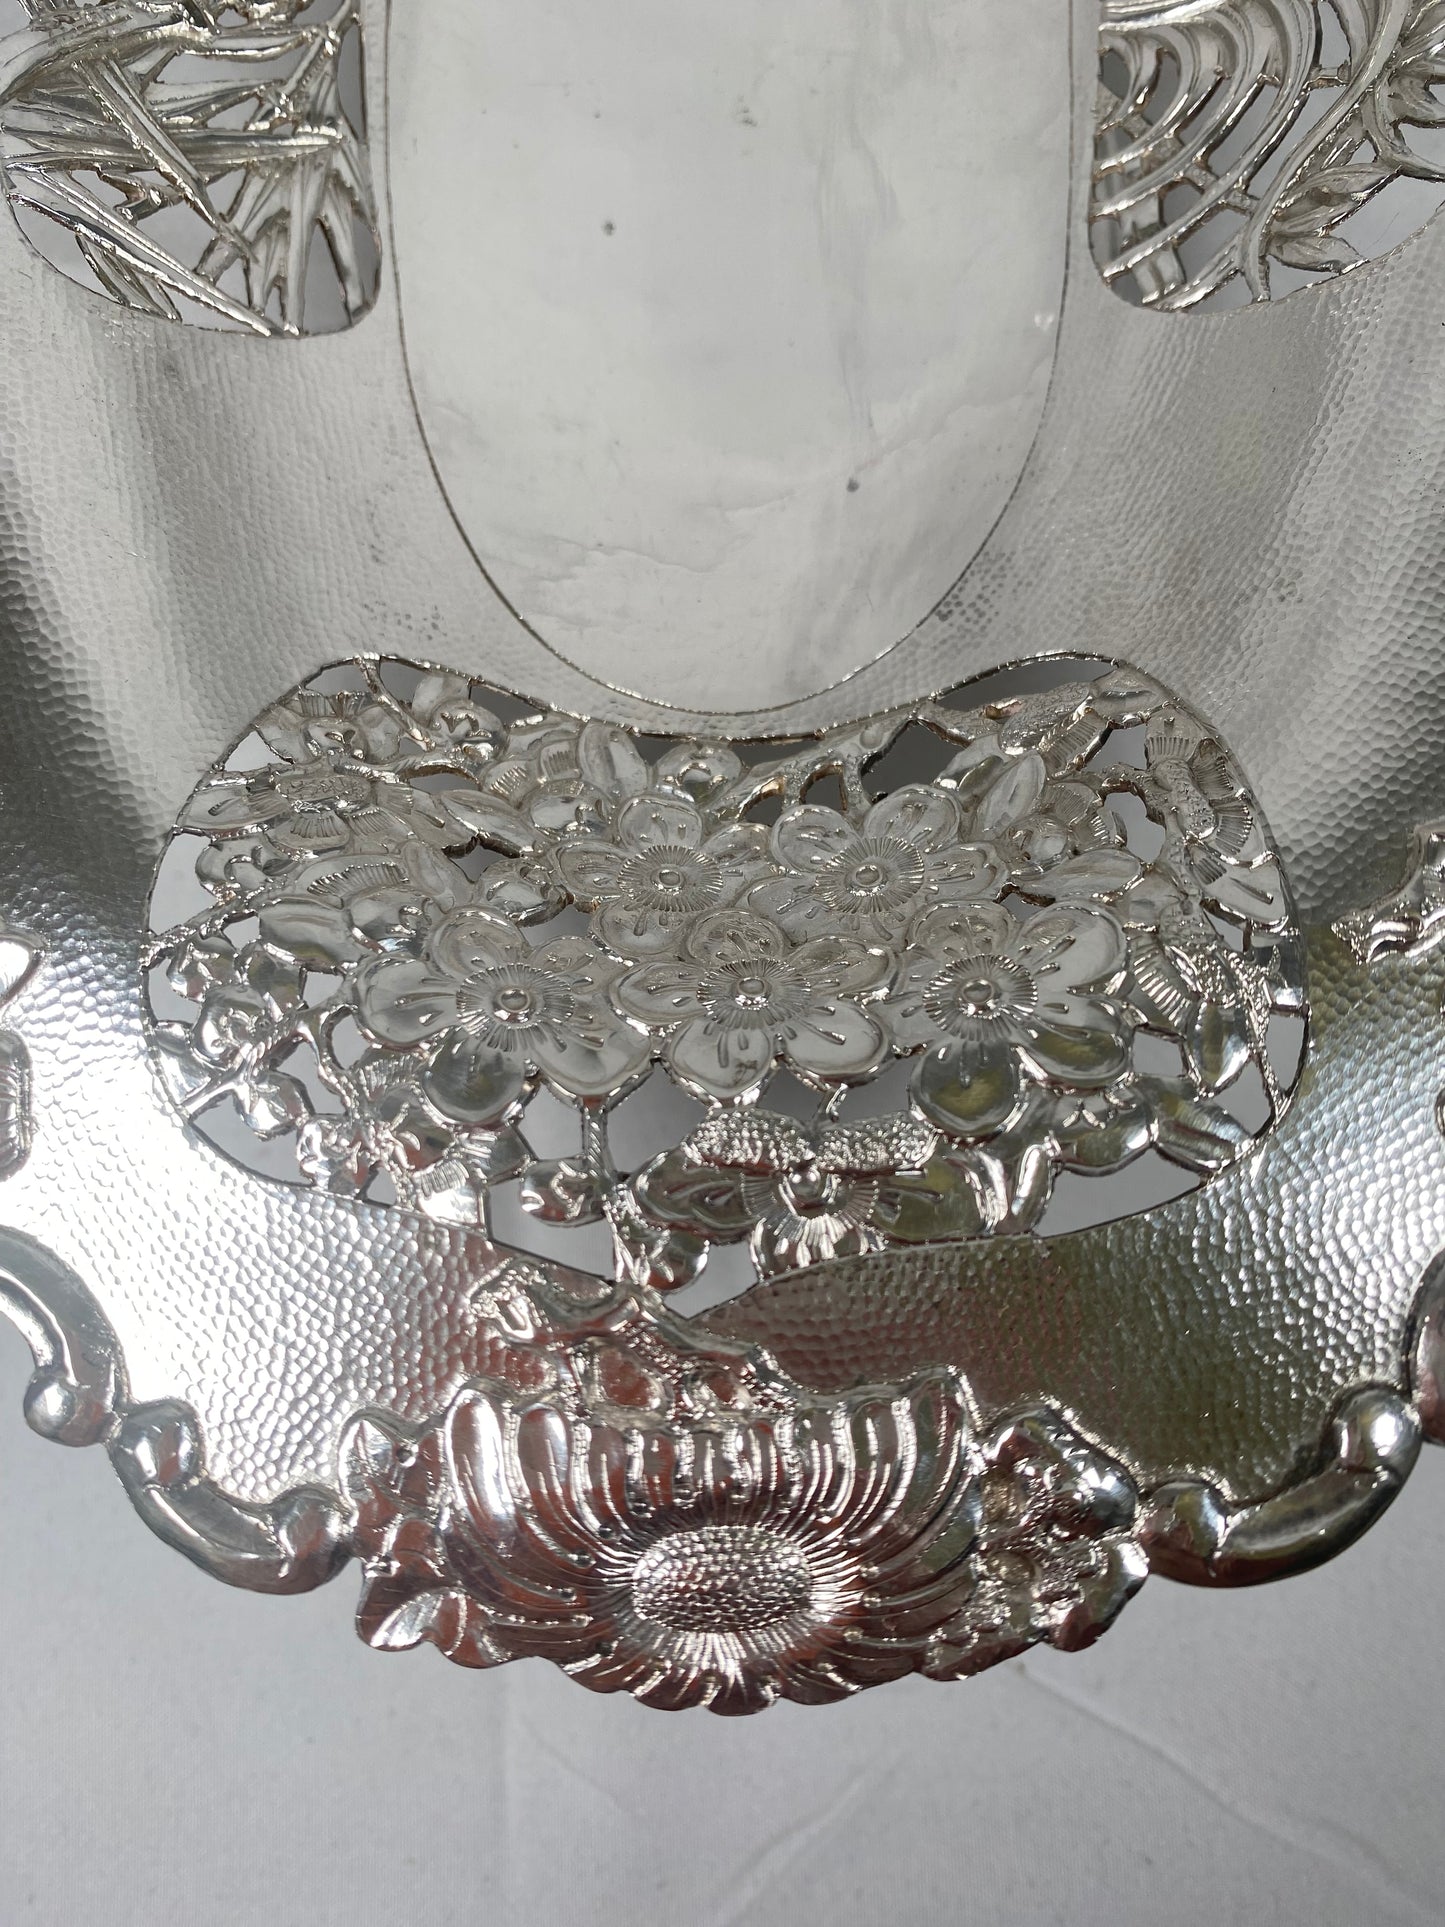 Antique Chinese Export Silver Swing-Handled Basket with Pierced Seasonal and Floral Motifs